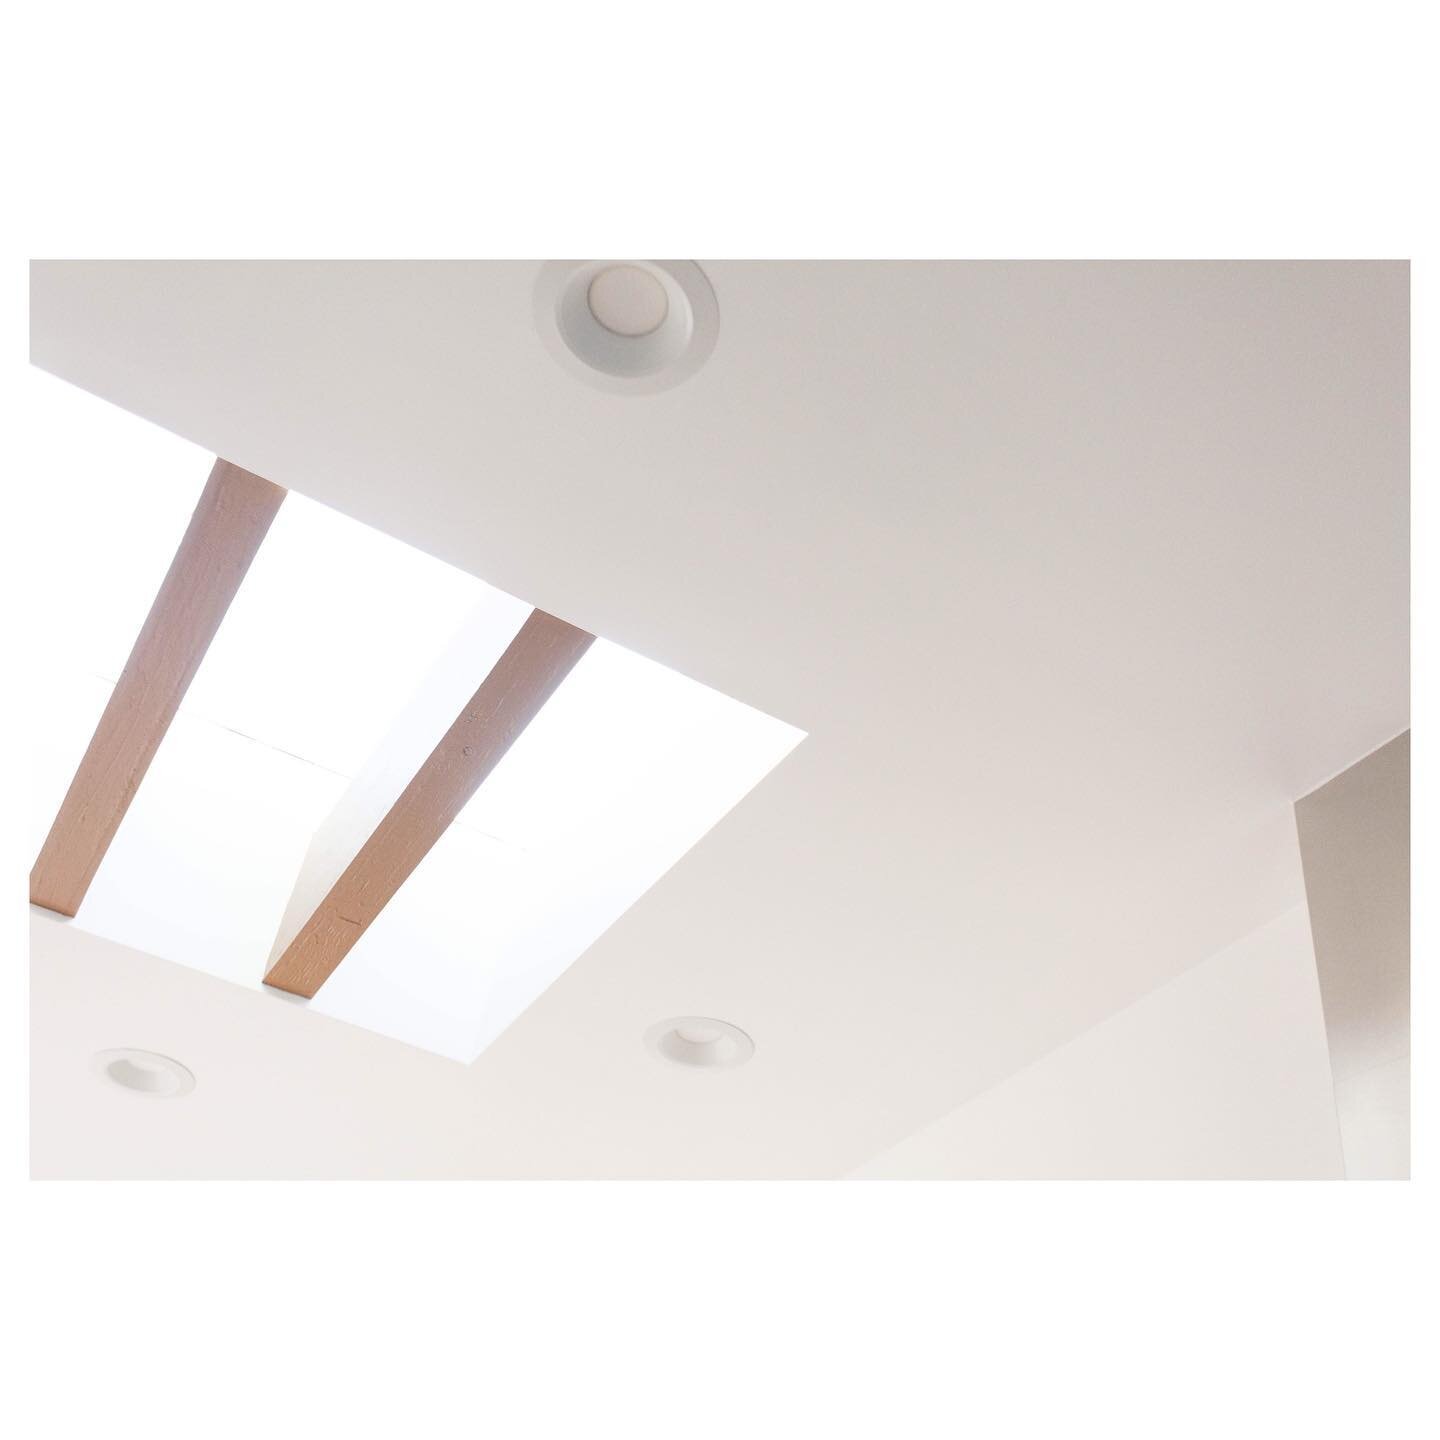 Skylights are a favorite for bringing in natural light and creating dimension. The beams in this one add a point of interest and tie the space together.

#poganyarchitecture